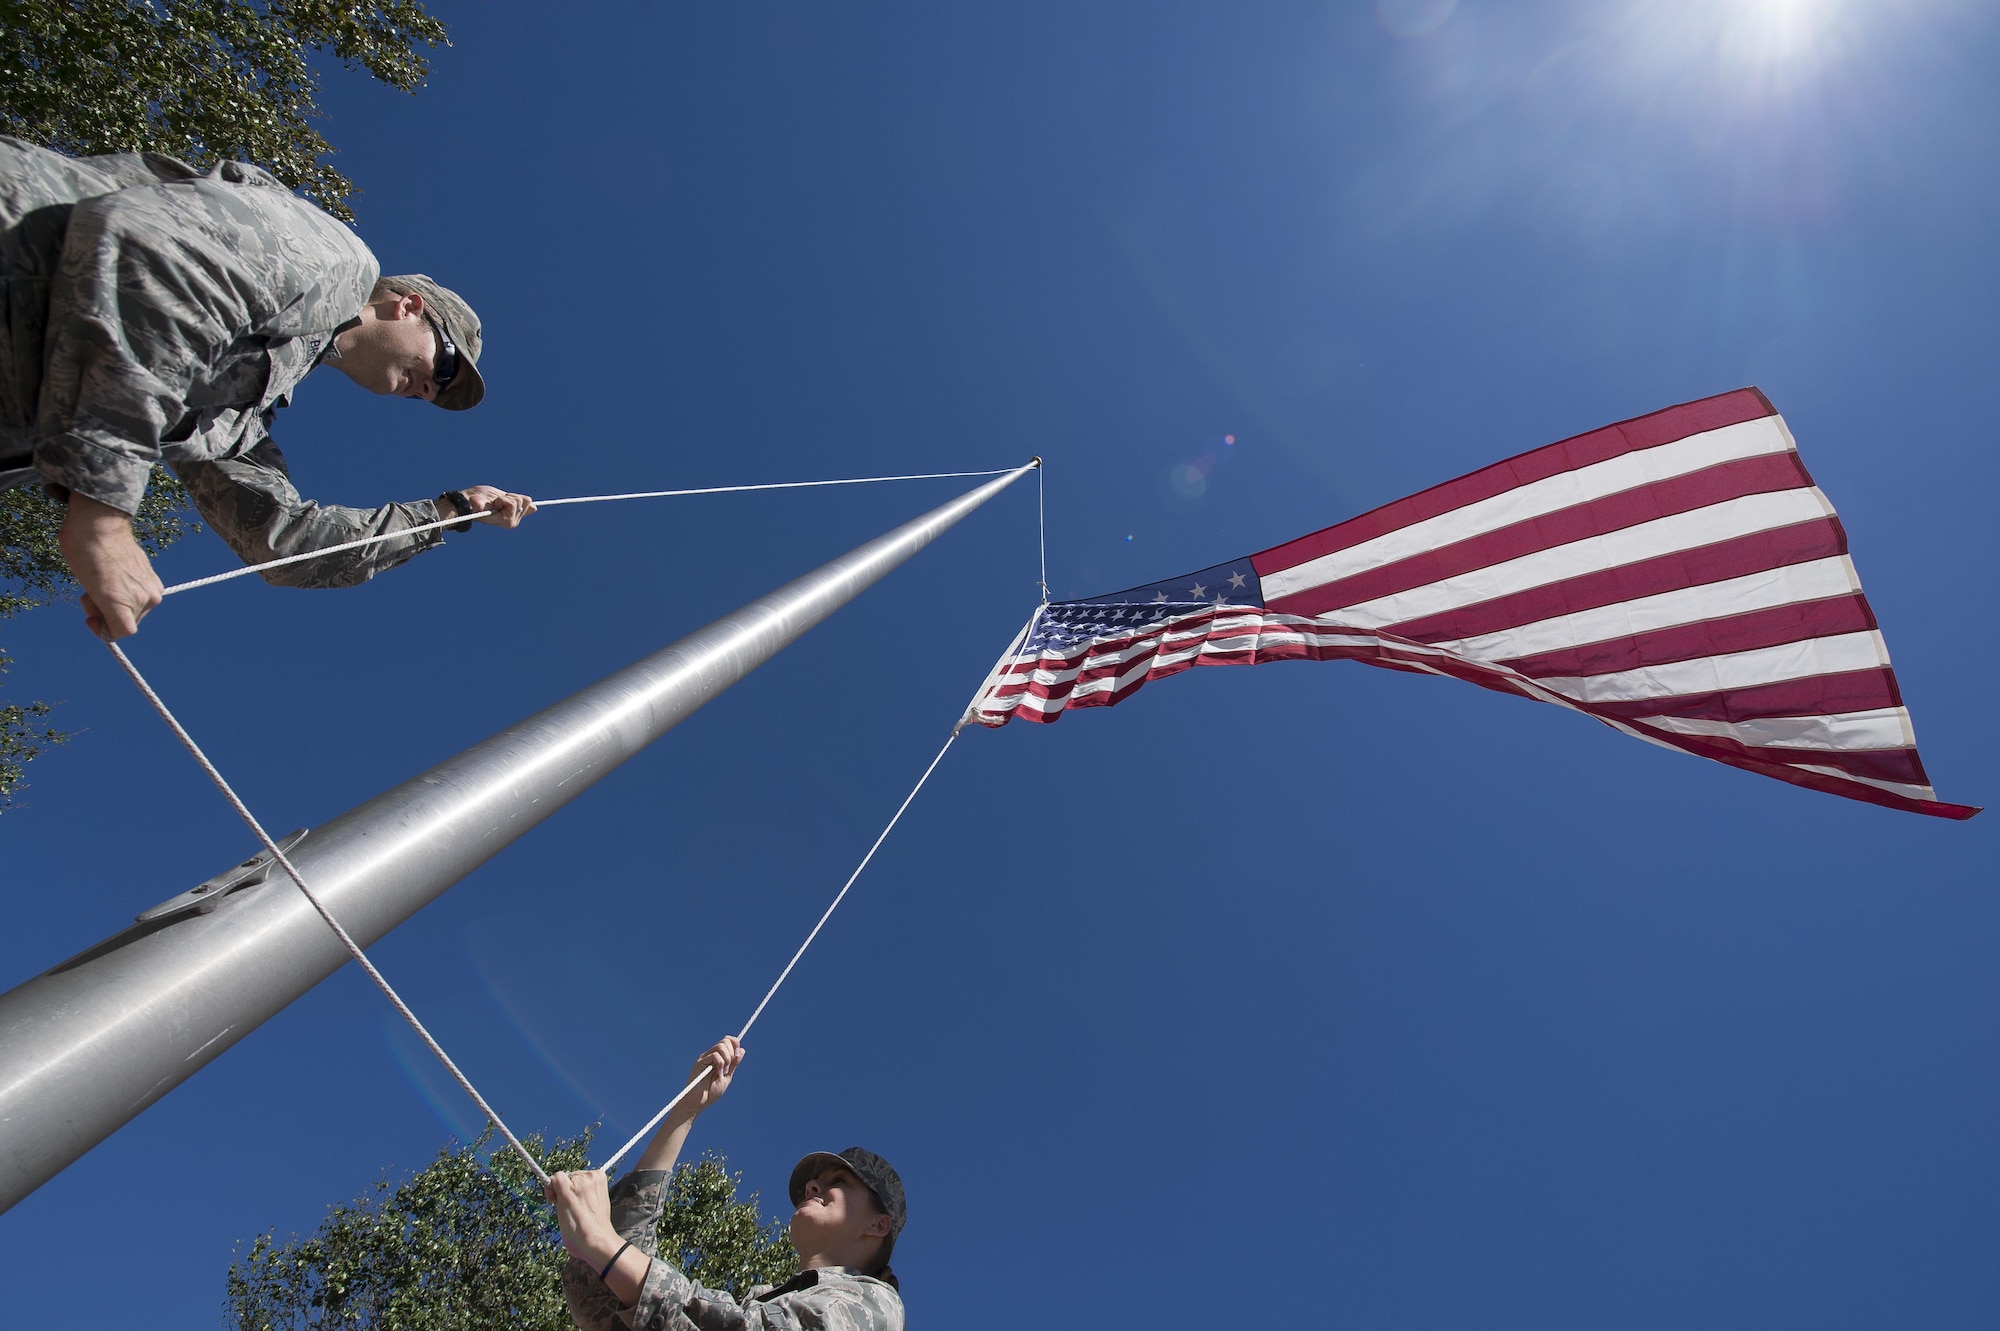 U.S. Air Force Lt. Col. Matthew Brennan, left, the commander of the 628th Civil Engineer Squadron, and Maj. Abbillyn Johnson, the commander of the 628th Logistics Readiness Squadron, raise the base flag over Joint Base Charleston, S.C., after Hurricane Matthew swept the area Oct. 9, 2016. All non-essential personnel evacuated the area, but returned after disaster response coordinators assessed damage and verified a safe operating environment.